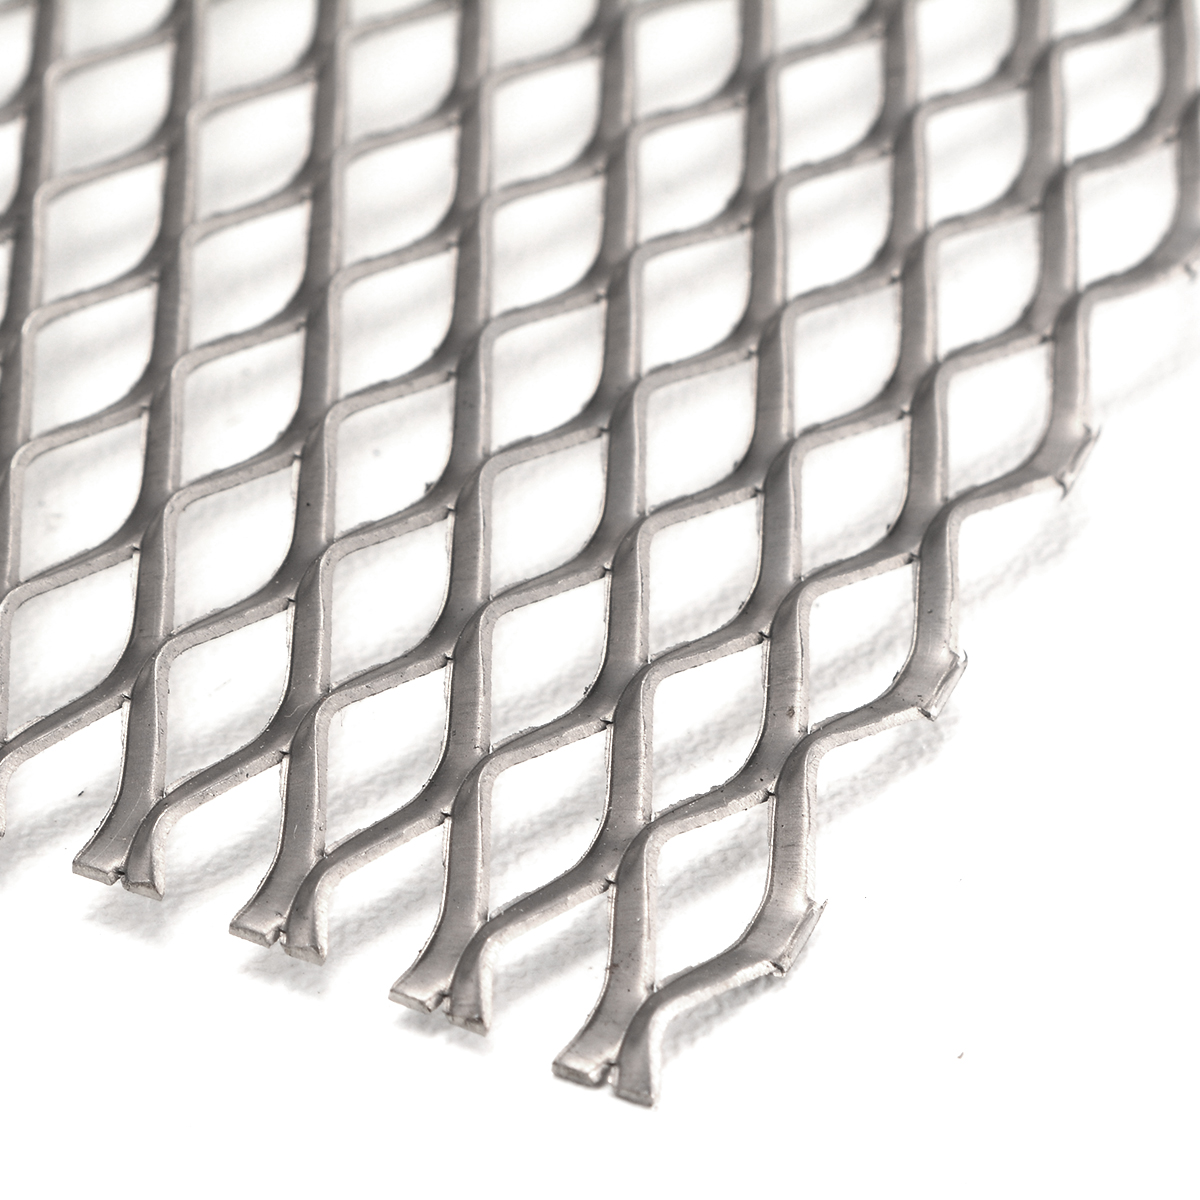 New Metal Hole Type Titanium Mesh Sheet 30cm X 20cm Perforated Plate Expanded Heat Corrosion Resistance Mesh Thickness 0.5mm